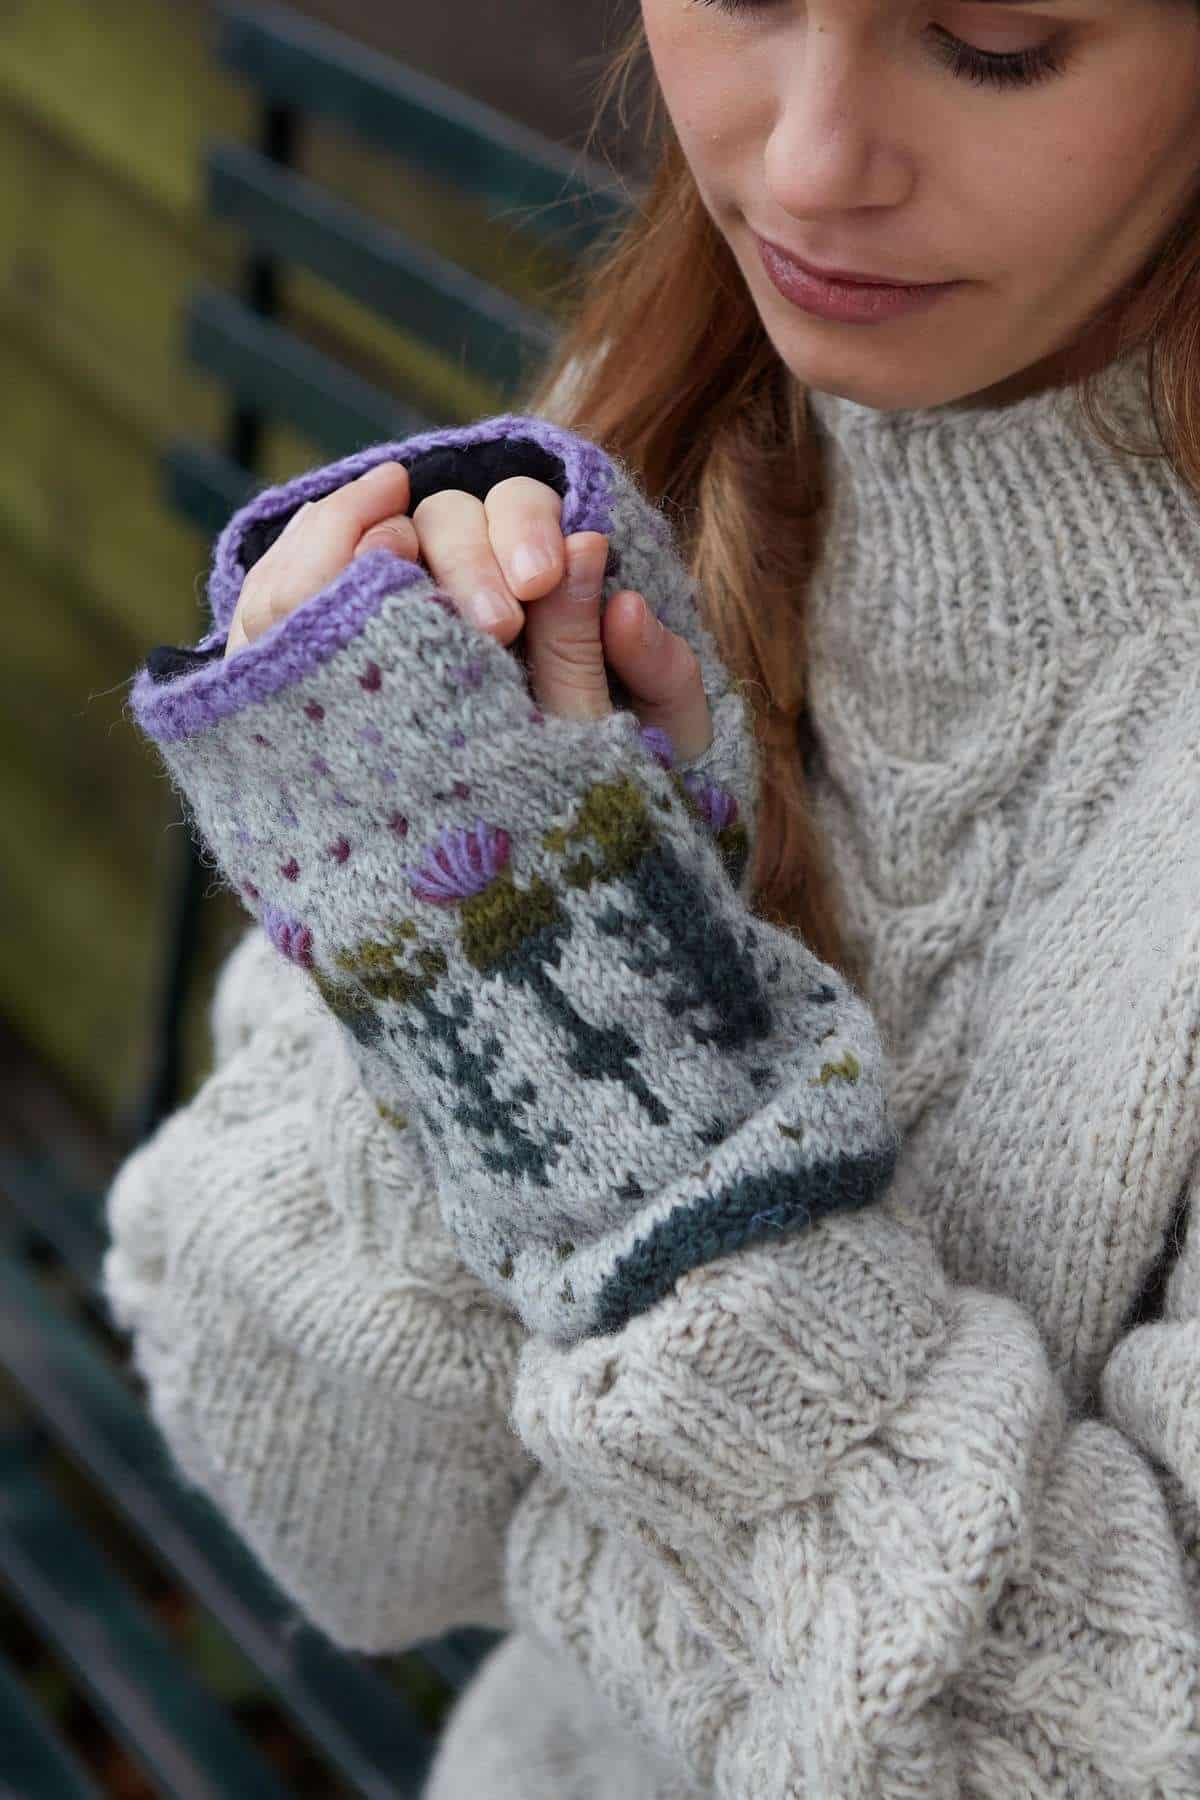 thistle handwarmer 3 <p style="text-align: center"><strong><span style="font-size: 18pt">Scottish Thistle Pattern Handwarmers.</span></strong></p> <p style="text-align: center"><span style="font-size: x-large">Individually embroidered thistles</span></p> <p style="text-align: center"><span style="font-size: x-large"><span id="span_description">Each thistle is carefully hand embroidered, creating for a very detailed look.</span></span></p> <p style="text-align: center"><span style="font-size: x-large">Embroidered with purple flowers. </span></p> <p style="text-align: center"><span style="font-size: x-large">100% Wool</span></p> <p style="text-align: center"><span style="font-size: x-large">Fleece lined</span></p> <p style="text-align: center">Colours and patterns may vary slightly due to the handmade nature of this product.</p> <div id="item_price" class="col-sm-12"> <p style="text-align: center">No two items are exactly the same!</p> <p style="text-align: center"> Handwarmer available in this pattern.</p> <p style="text-align: center">All colours are represented as closely as possible, we cannot guarantee 100% accuracy.</p> <h1 style="text-align: center">FREE P&P</h1> </div>